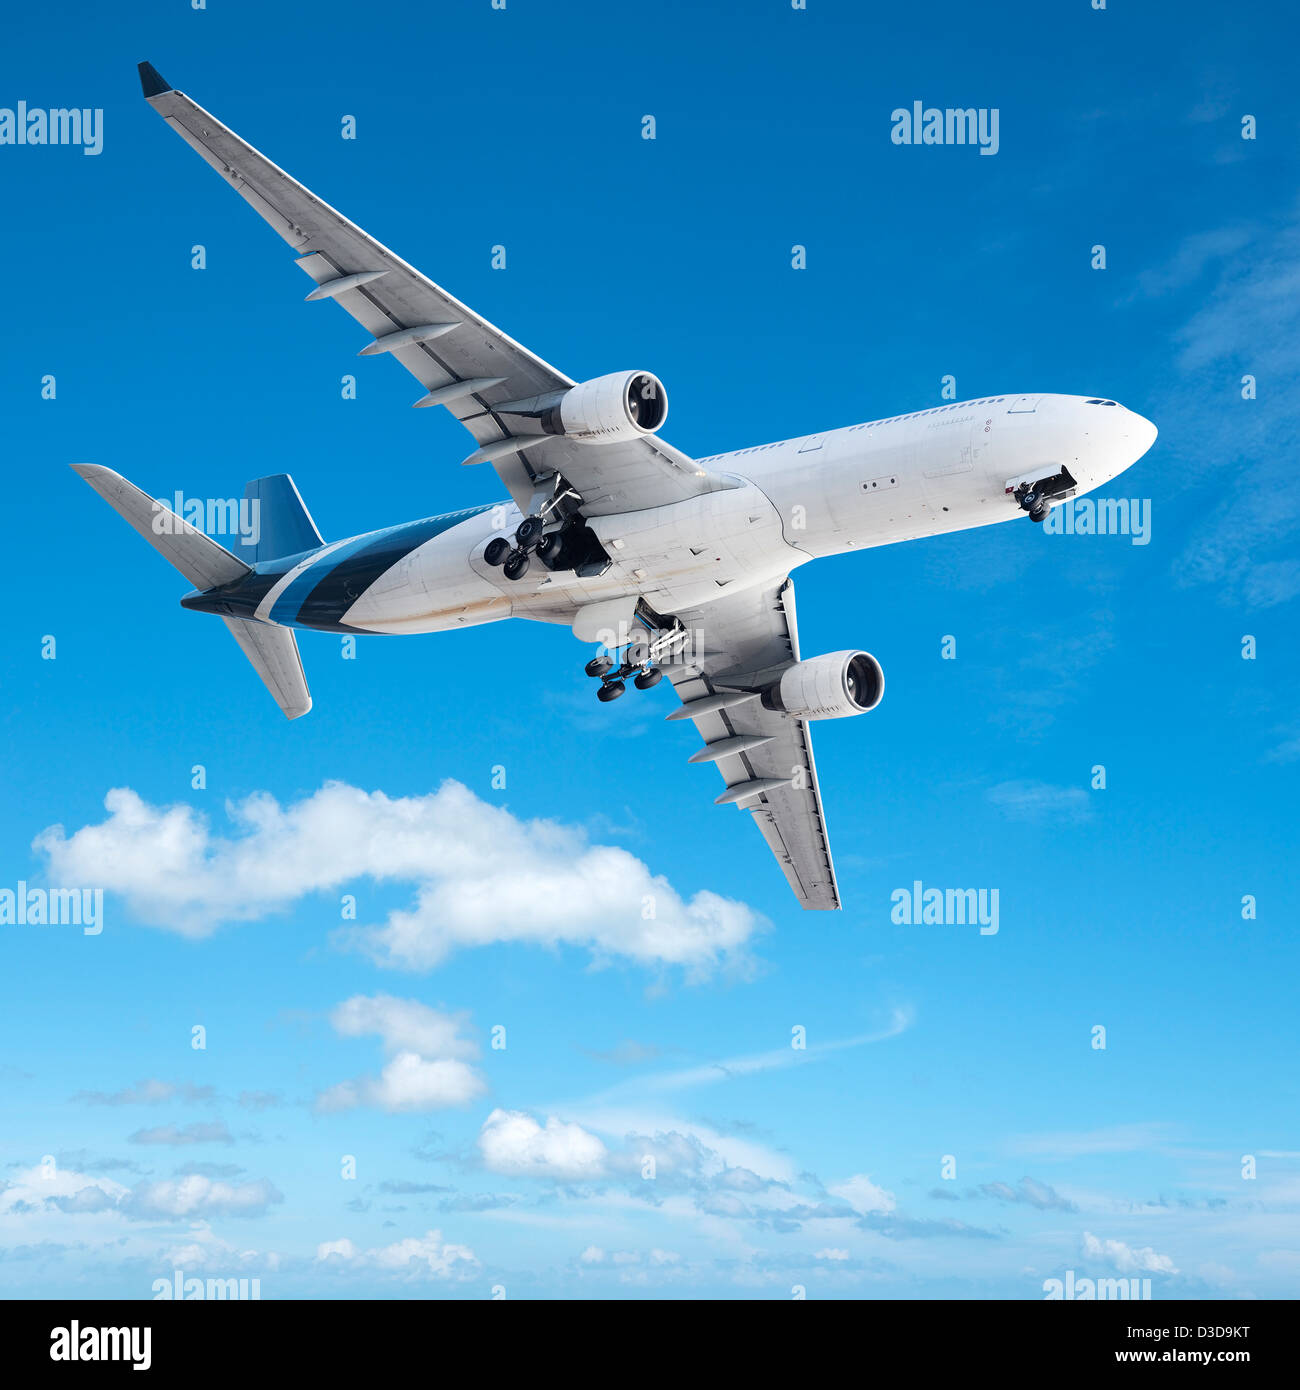 Jet in a clear blue sky. Square composition. Stock Photo